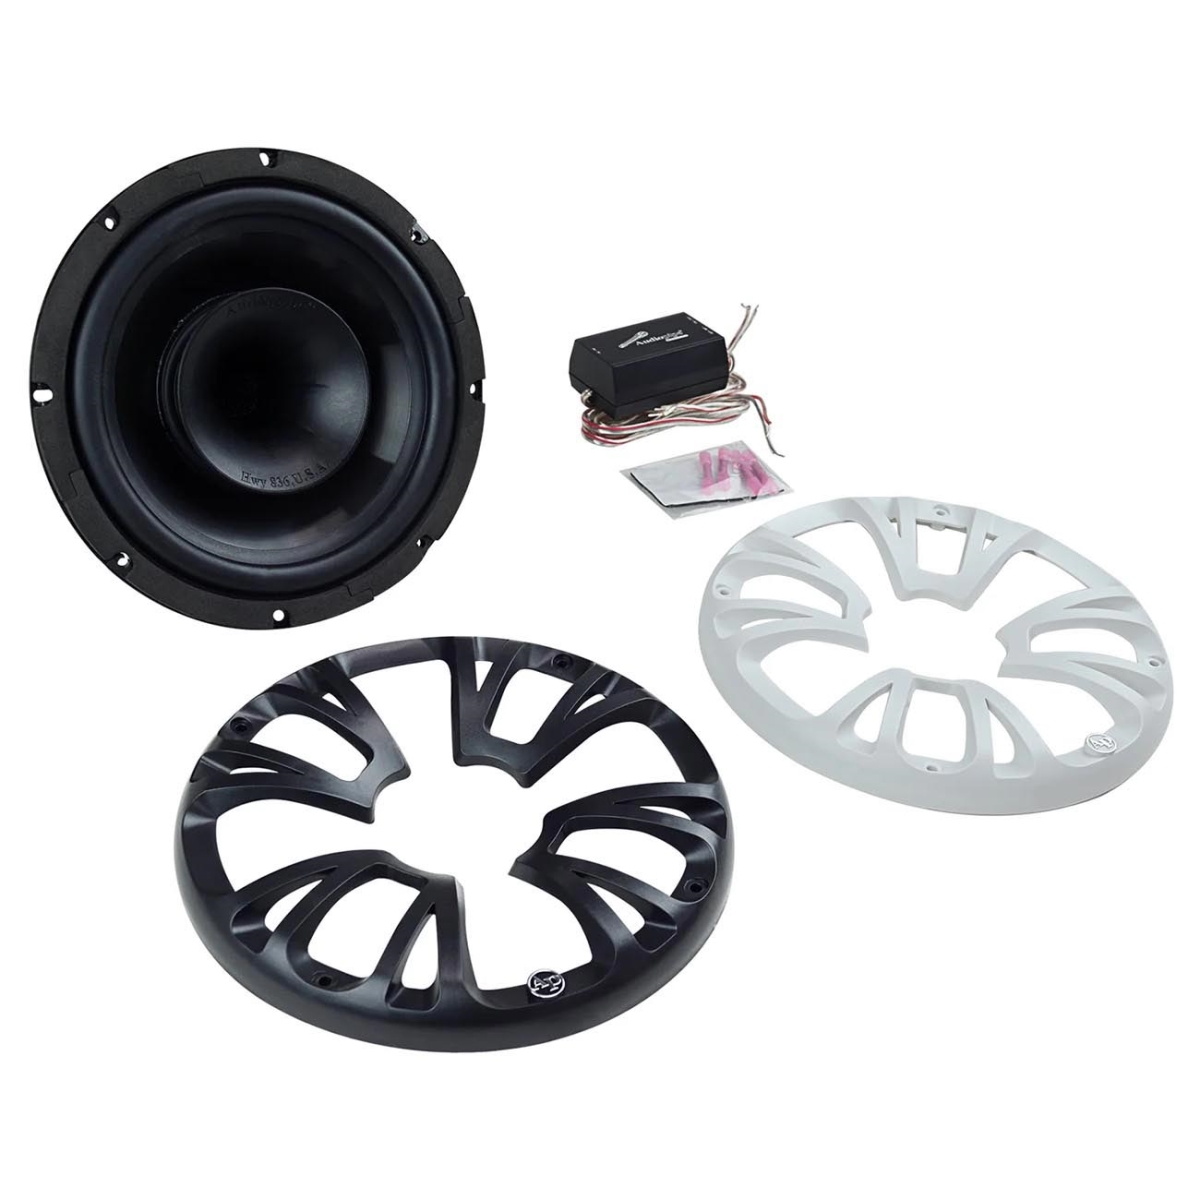 Picture of Audiopipemap APMST836H 8 in. 250W Audiopipe Weatherproof Speaker with Built in Compression Driver